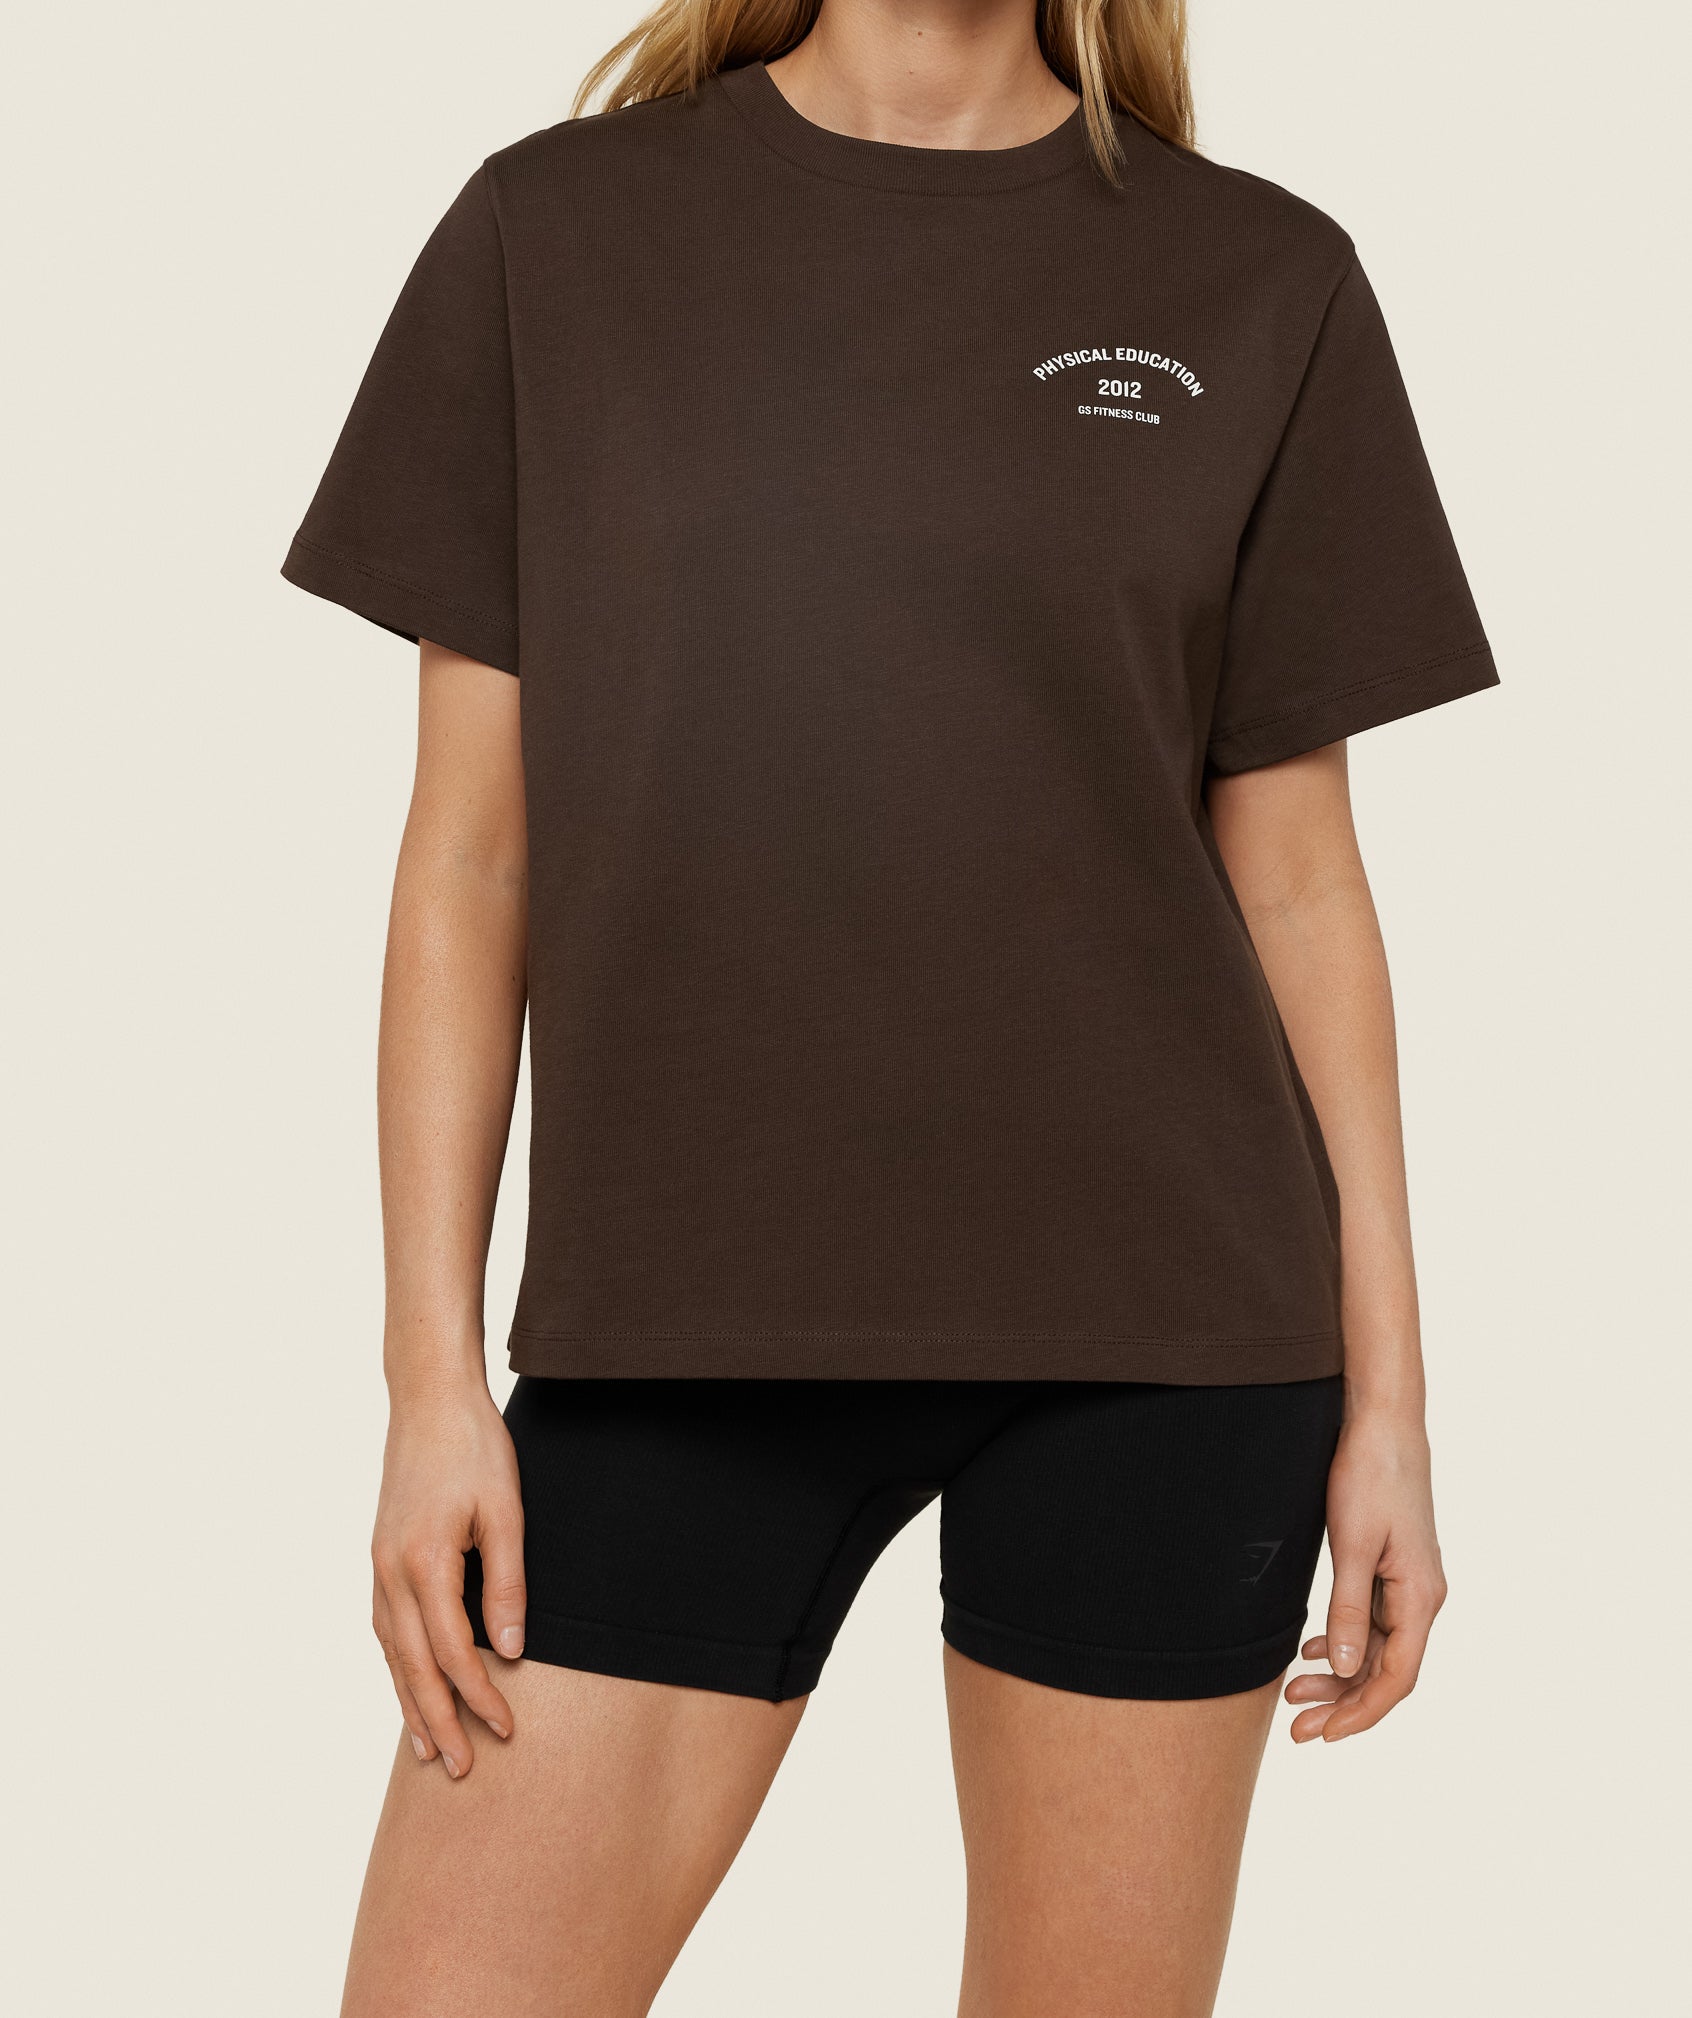 Phys Ed Graphic T-Shirt in Archive Brown - view 3